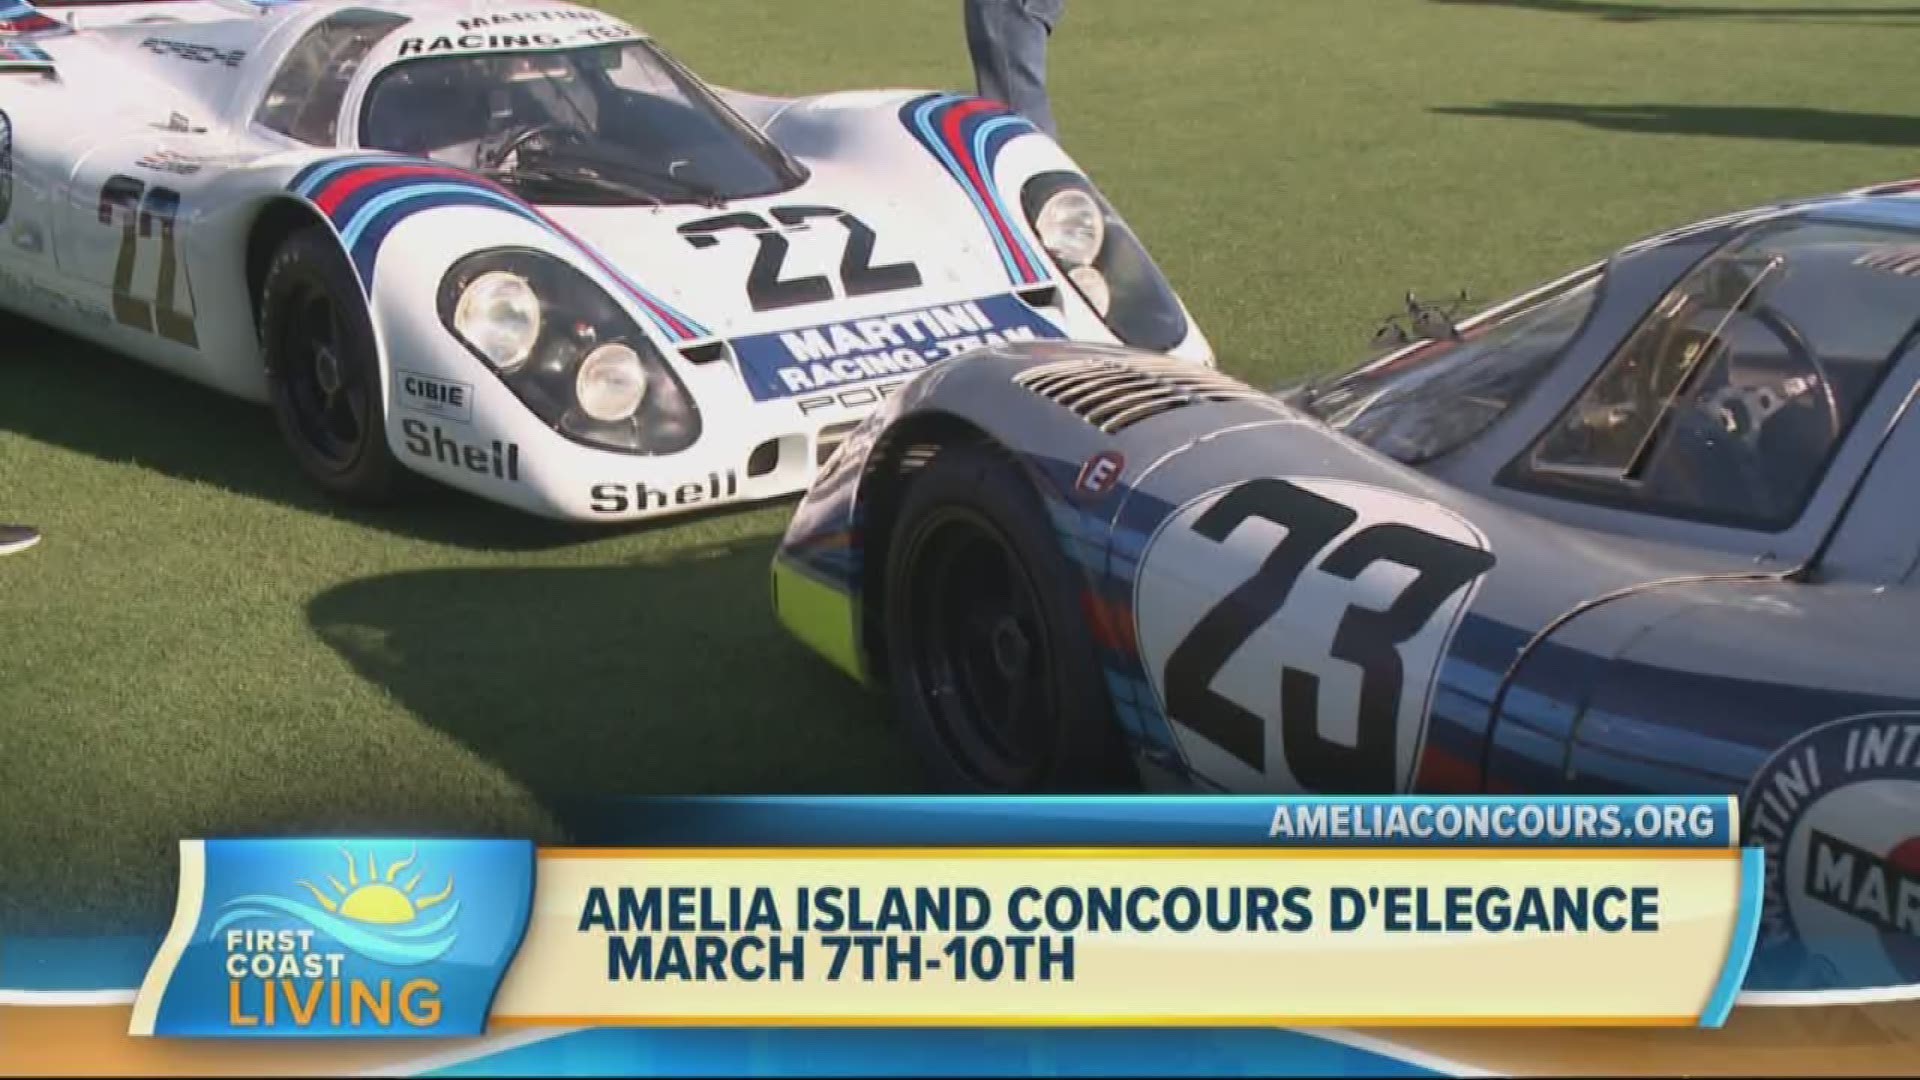 Here's what you can expect when going to the annual Amelia Island Concours d'Elegance.